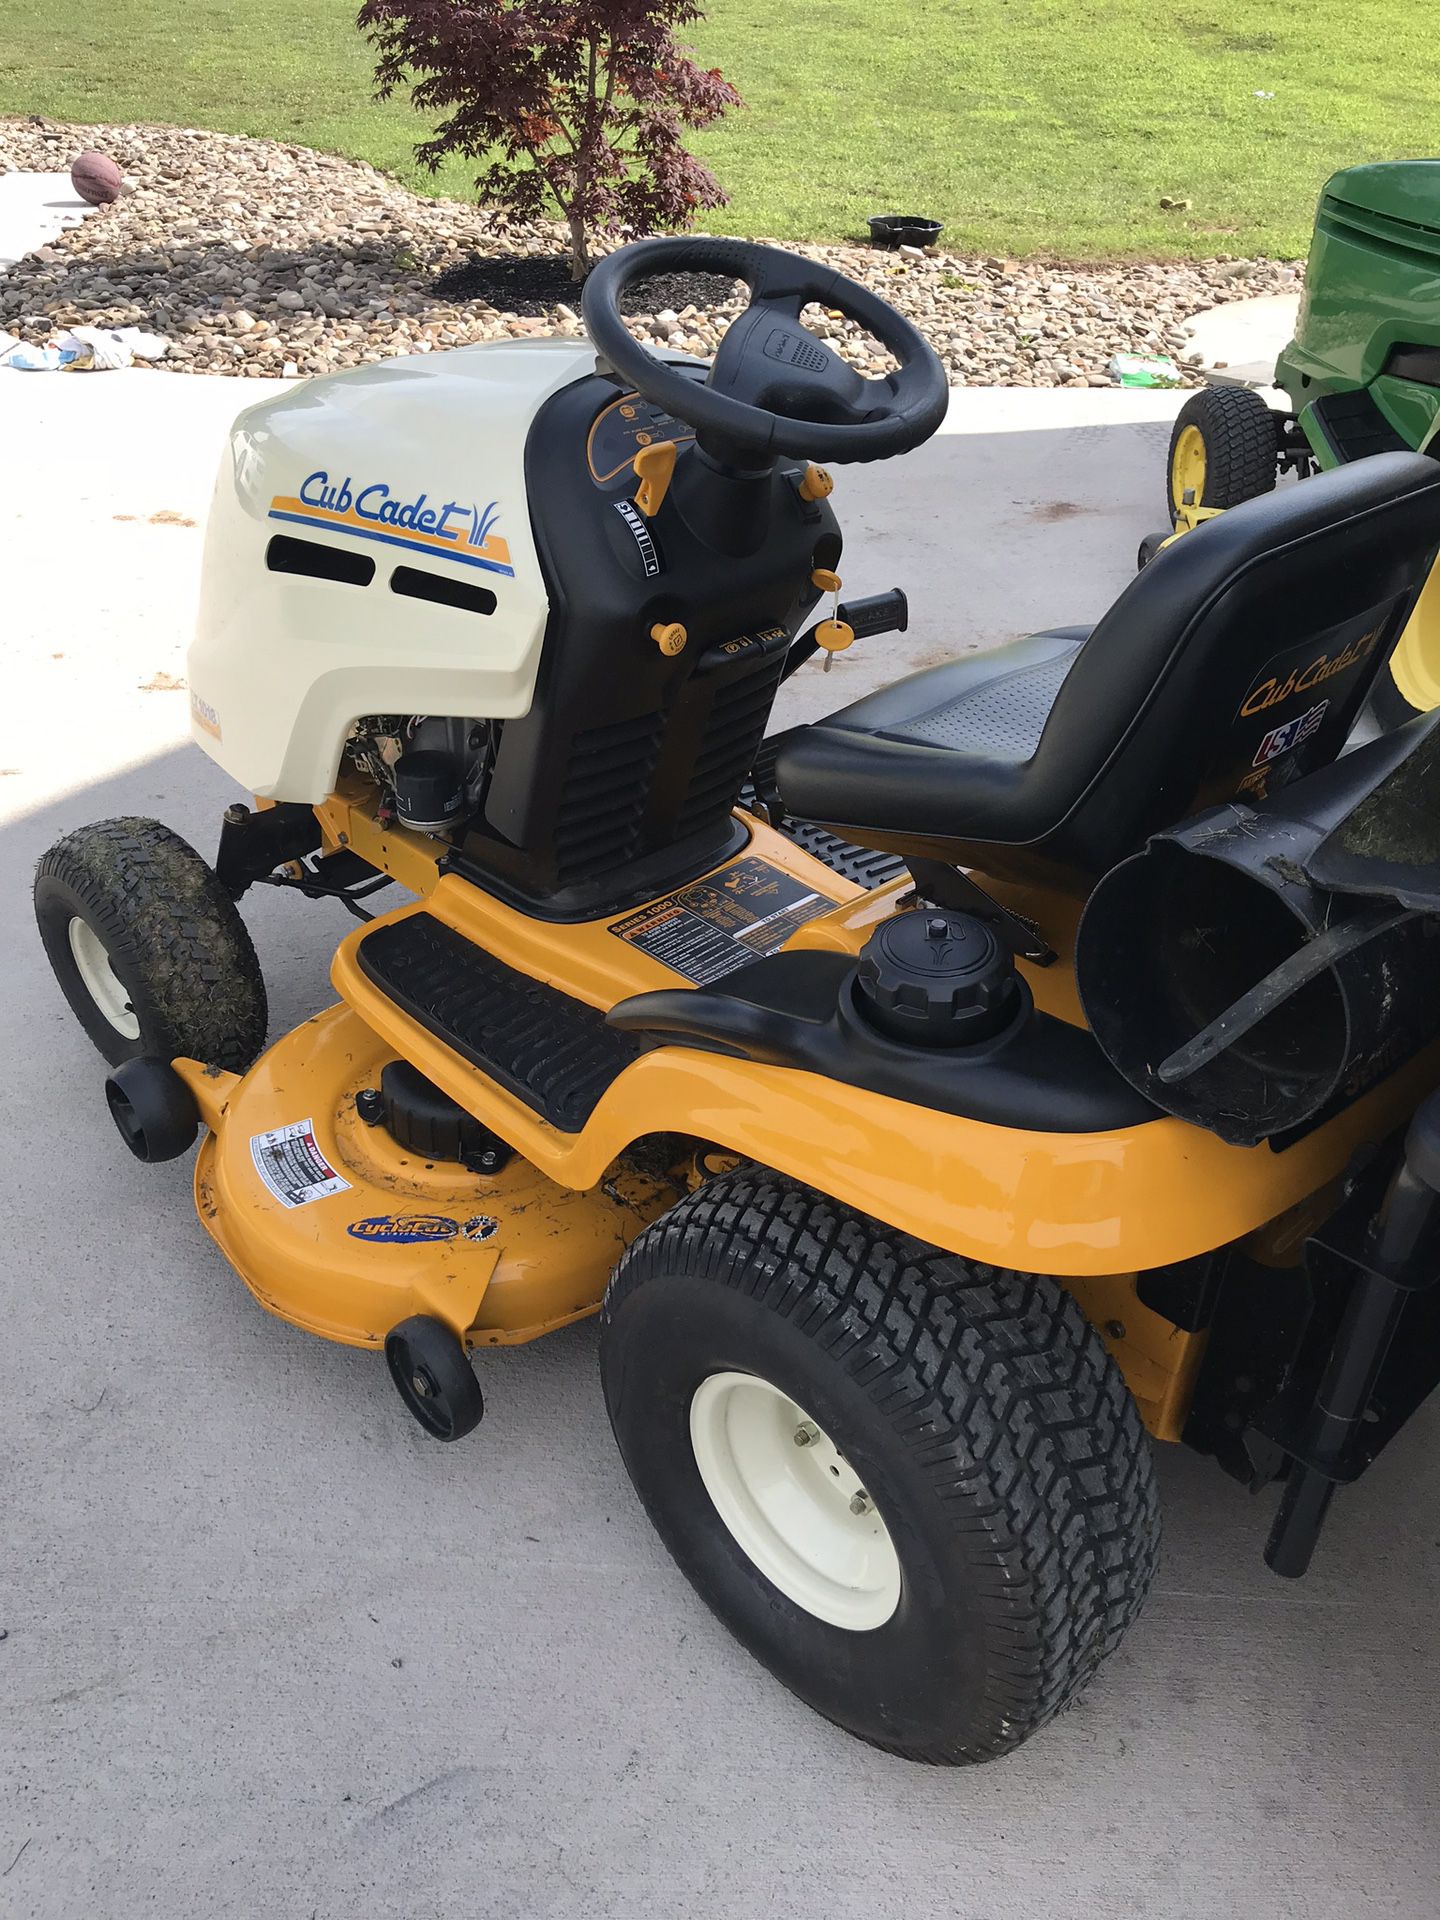 Cub cadet with 26 hours like brand new with bagger hydro